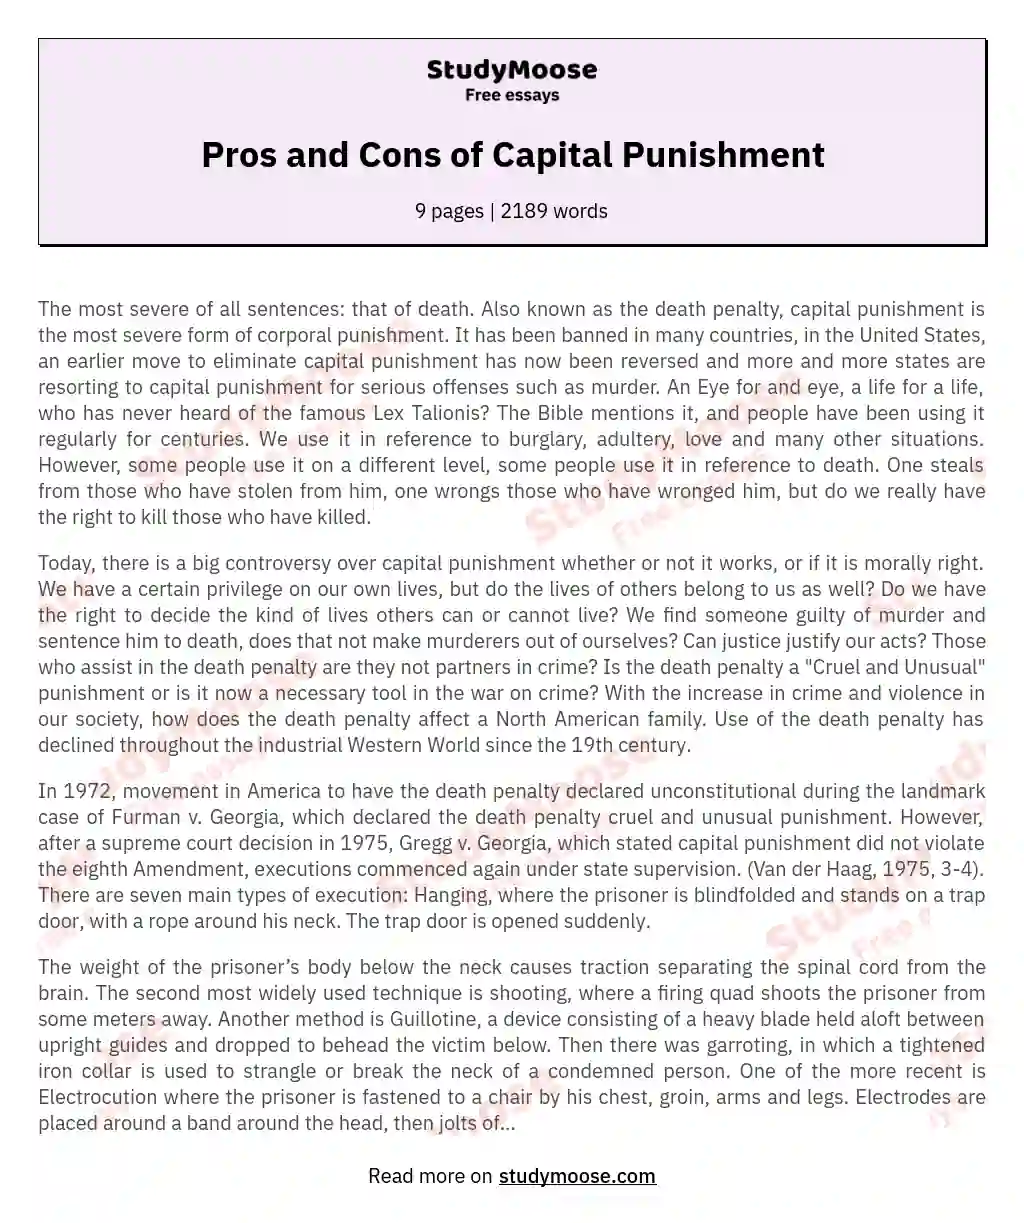 Pros and Cons of Capital Punishment